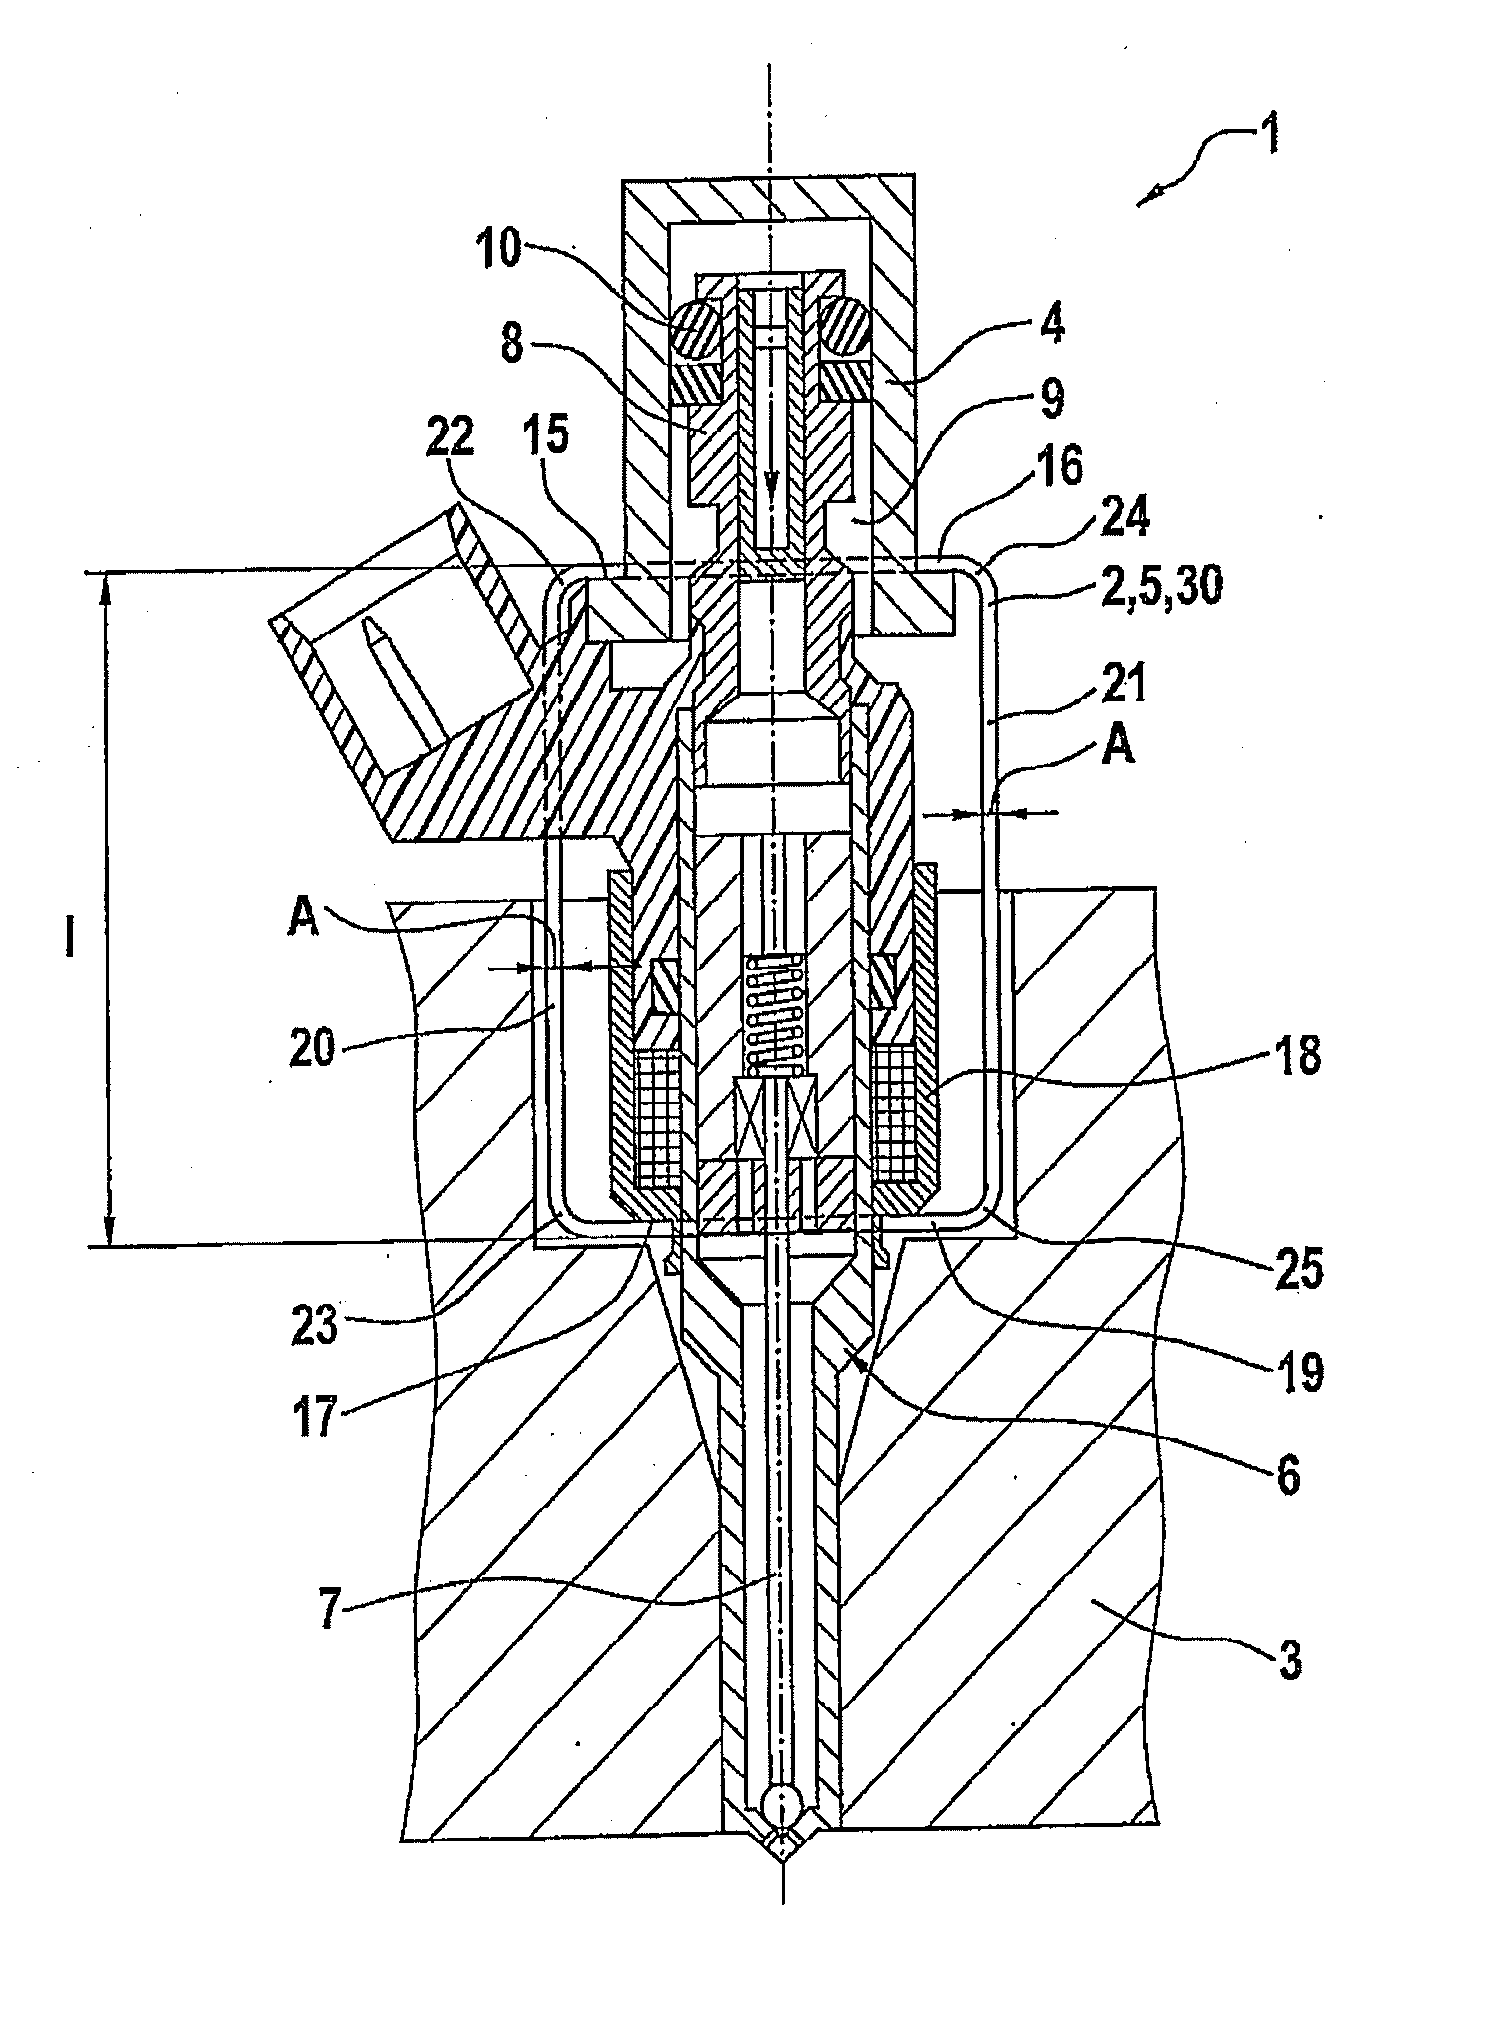 Fuel injection system having a fuel-carrying component, a fuel injector and a connecting device